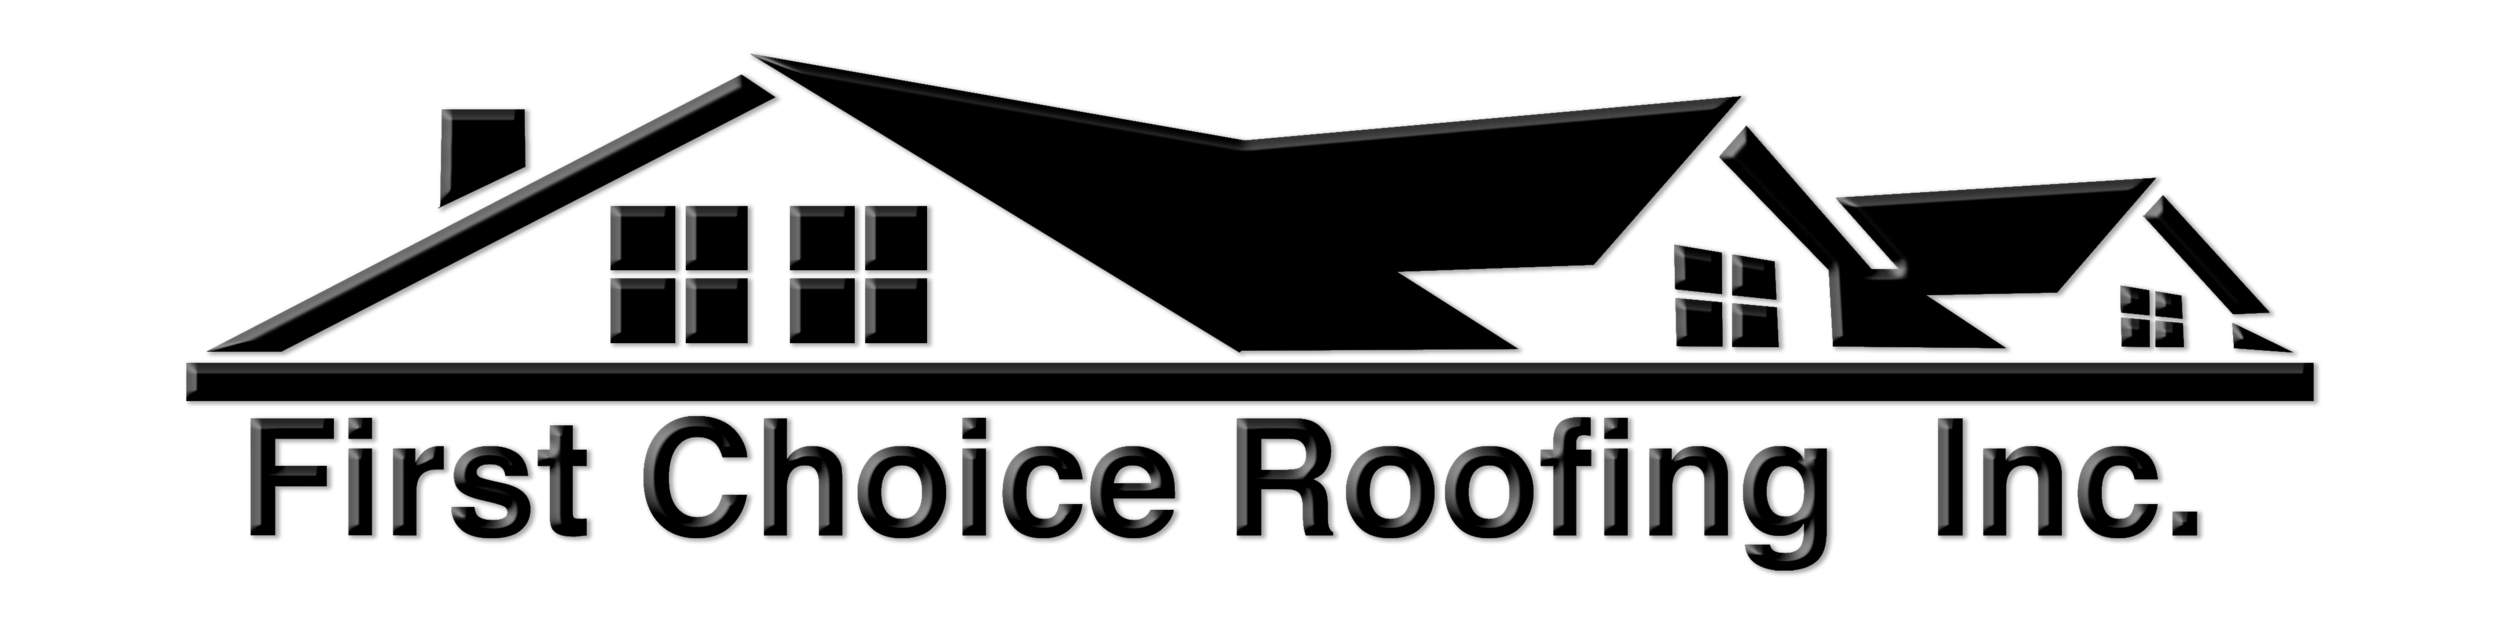 First Choice Roofing Inc Logo